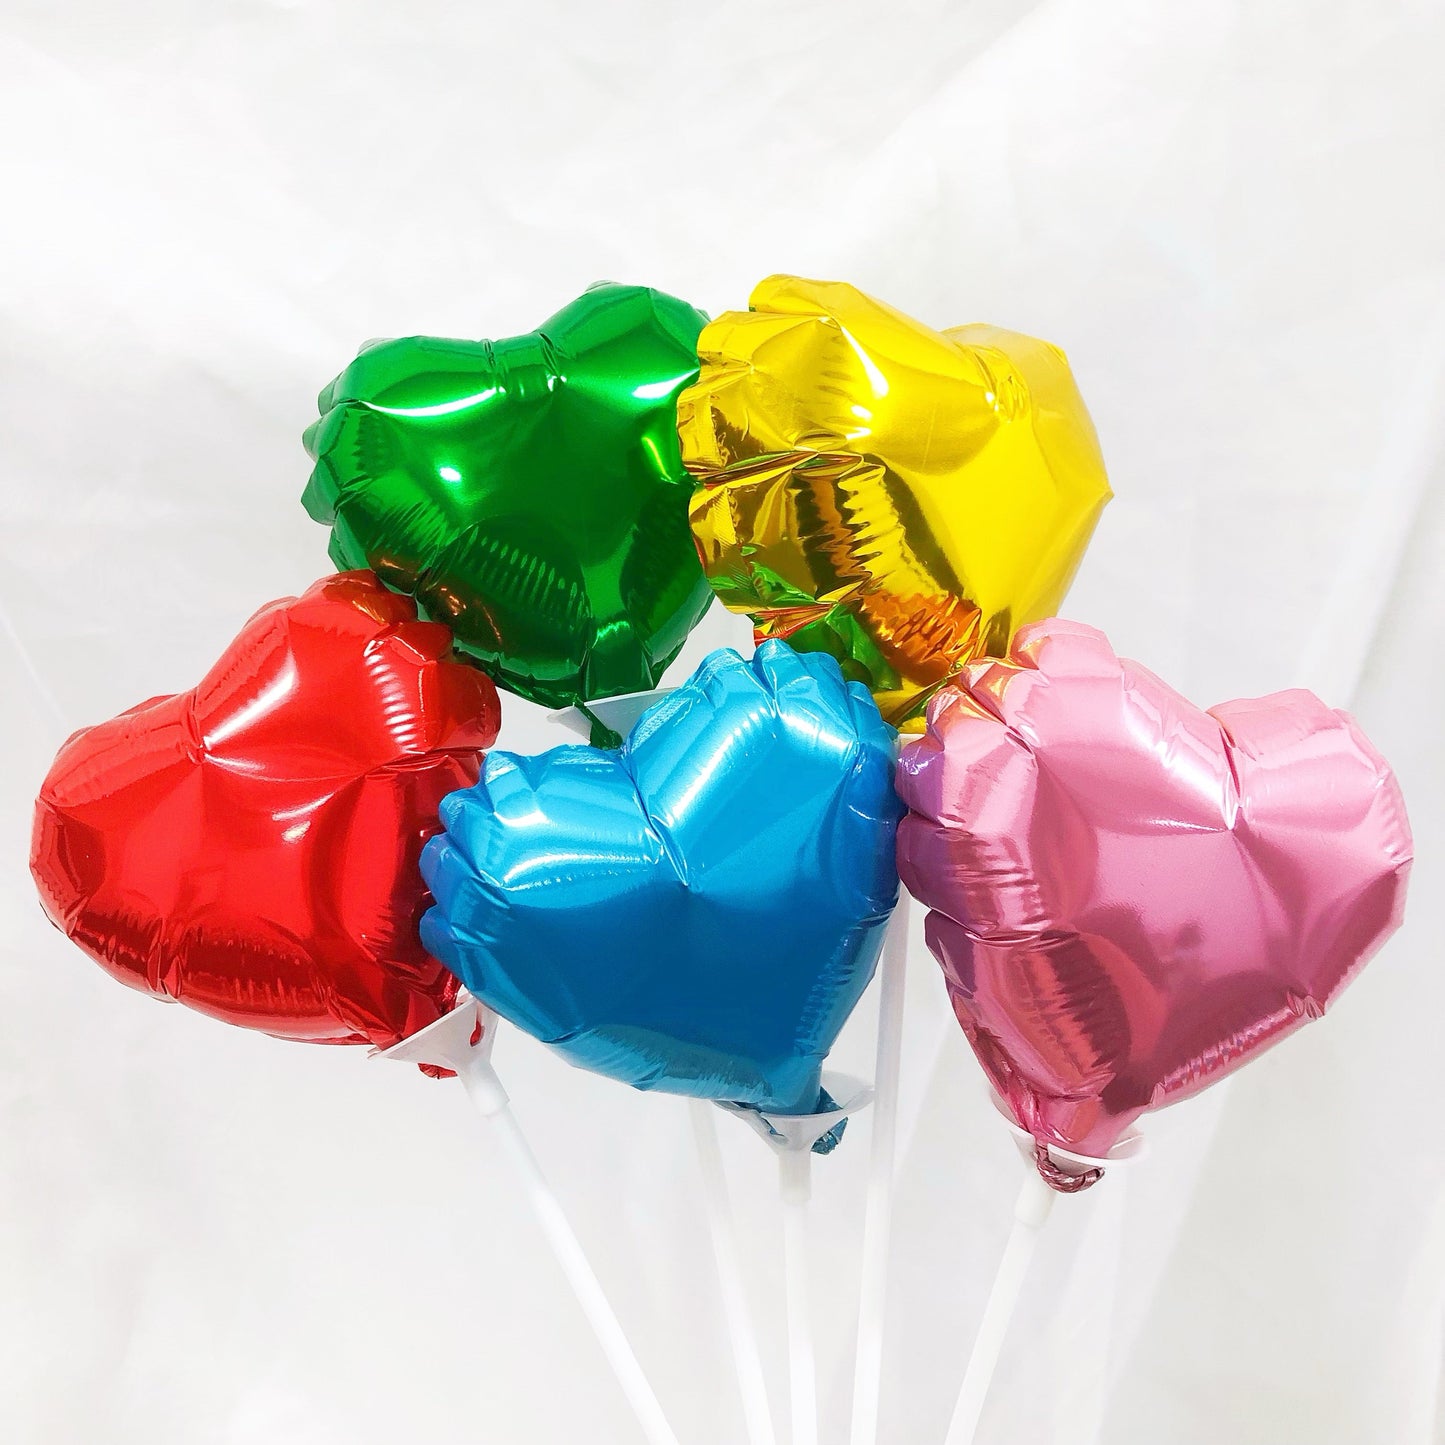 Heart-Shaped Inflated Foil Balloon in Blue (Small)